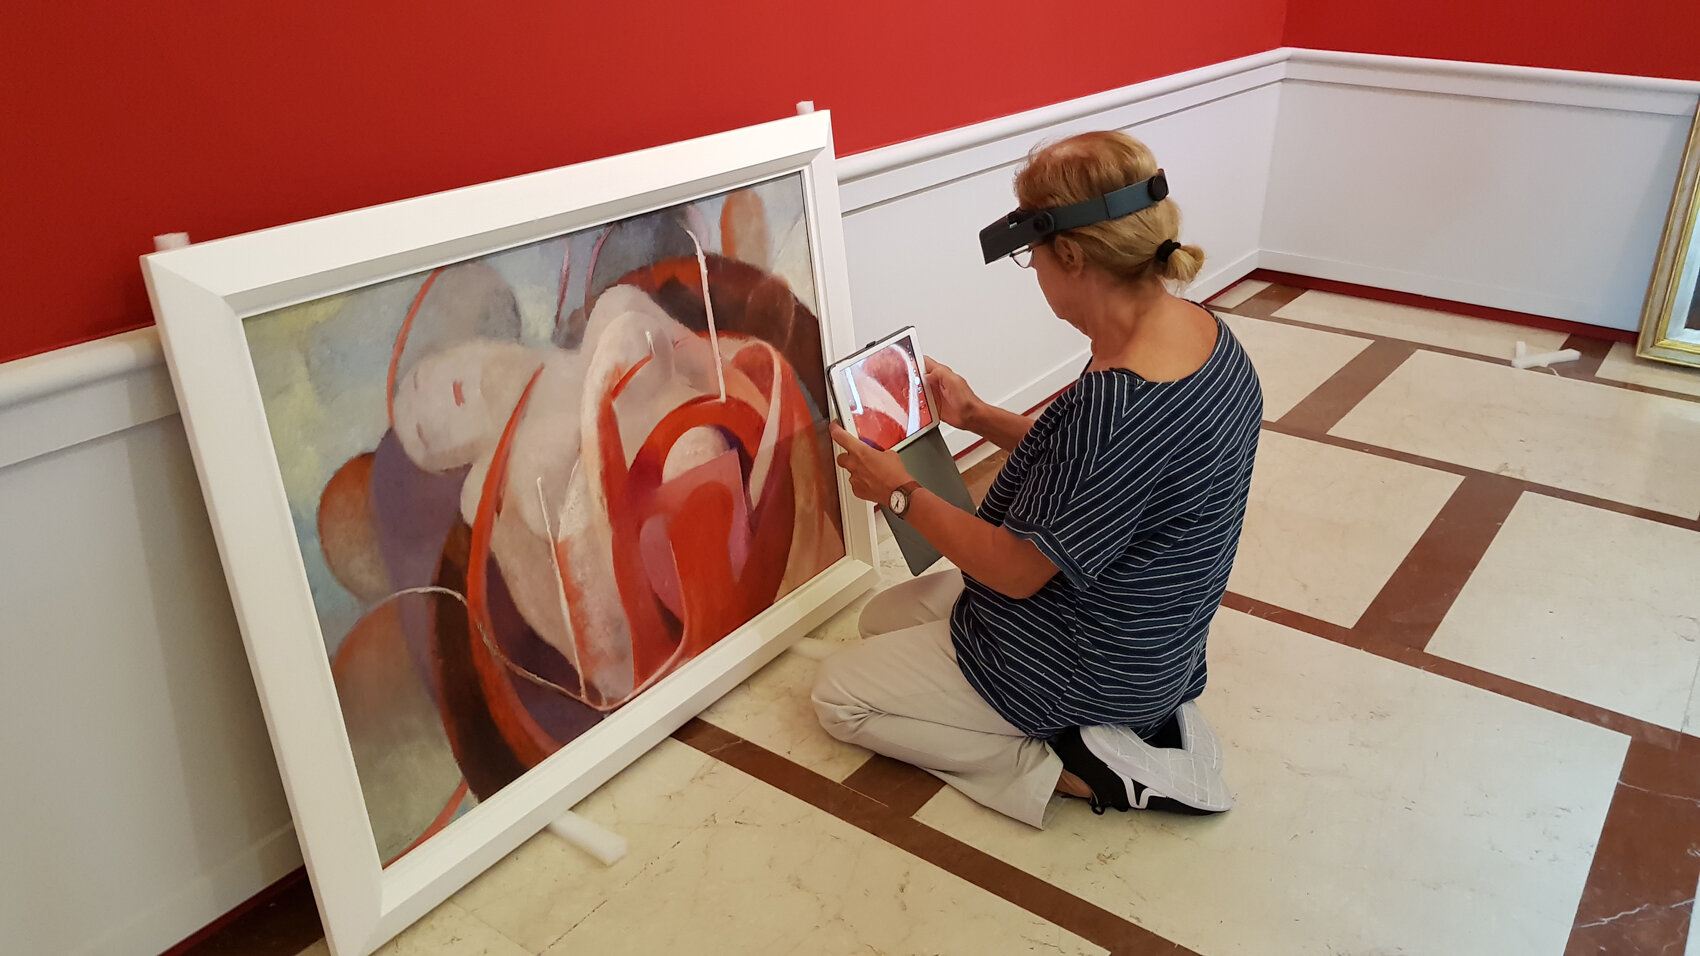  Rossella Lari preforming a ‘conservation check’ on Marisa Mori’s eclectic ‘maternity’ painting. The exhibition ‘Artiste: Florence 1900-1950’, with AWA and Fondazione CR Firenze, emphasized that even 20th-century works by women need maintenance and r